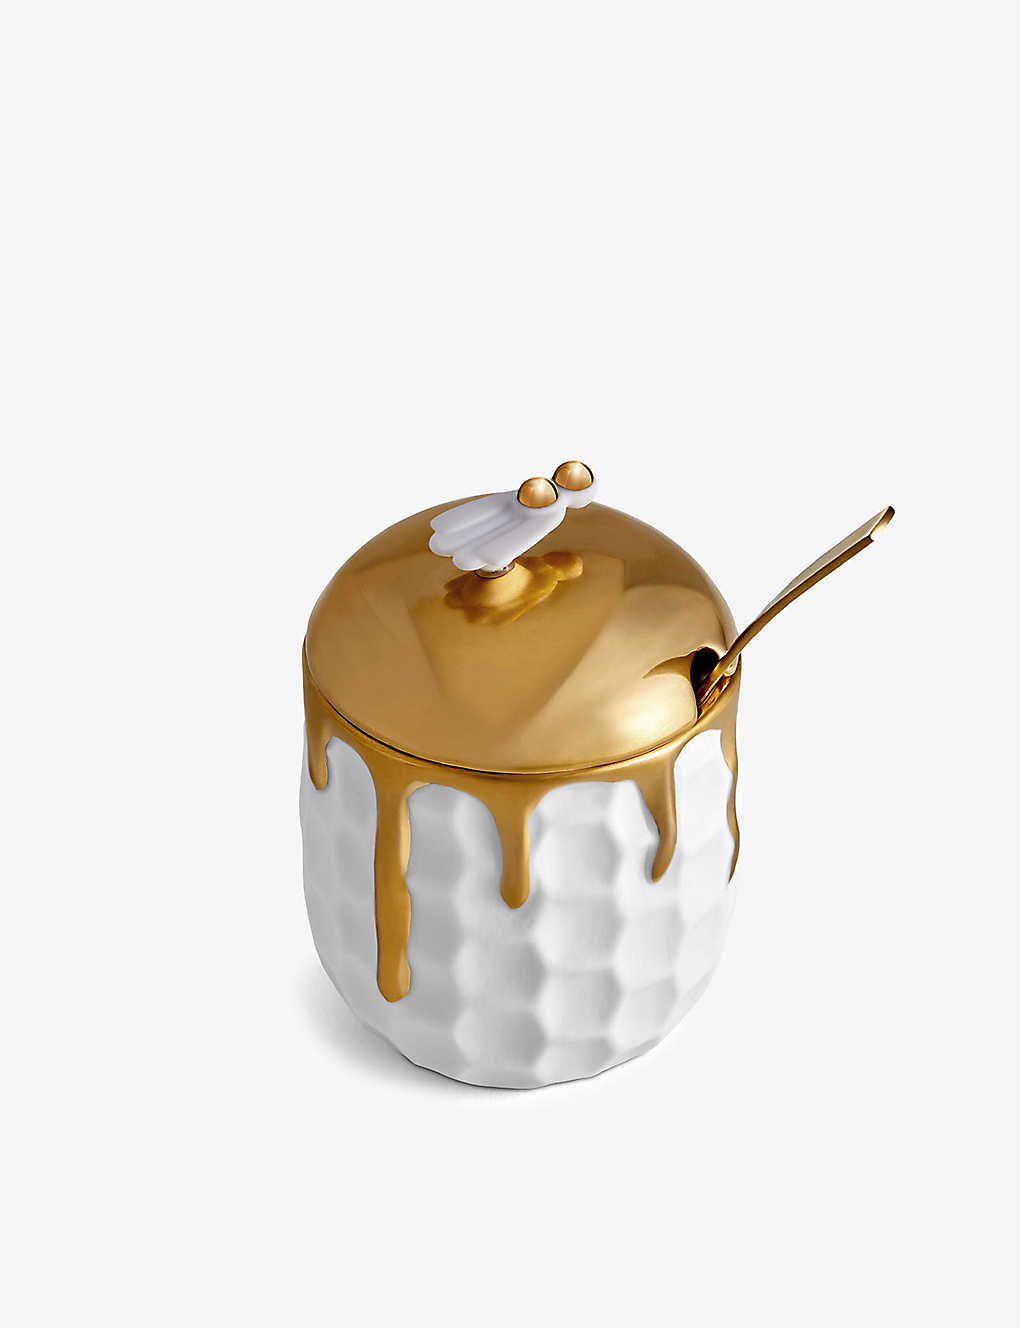 L'OBJET ビーハイブ 器24カラット金メッキ スプーン付きハニーポット 13cm Beehive porcelain and 24ct gold-plated honeypot with spoon 13cm